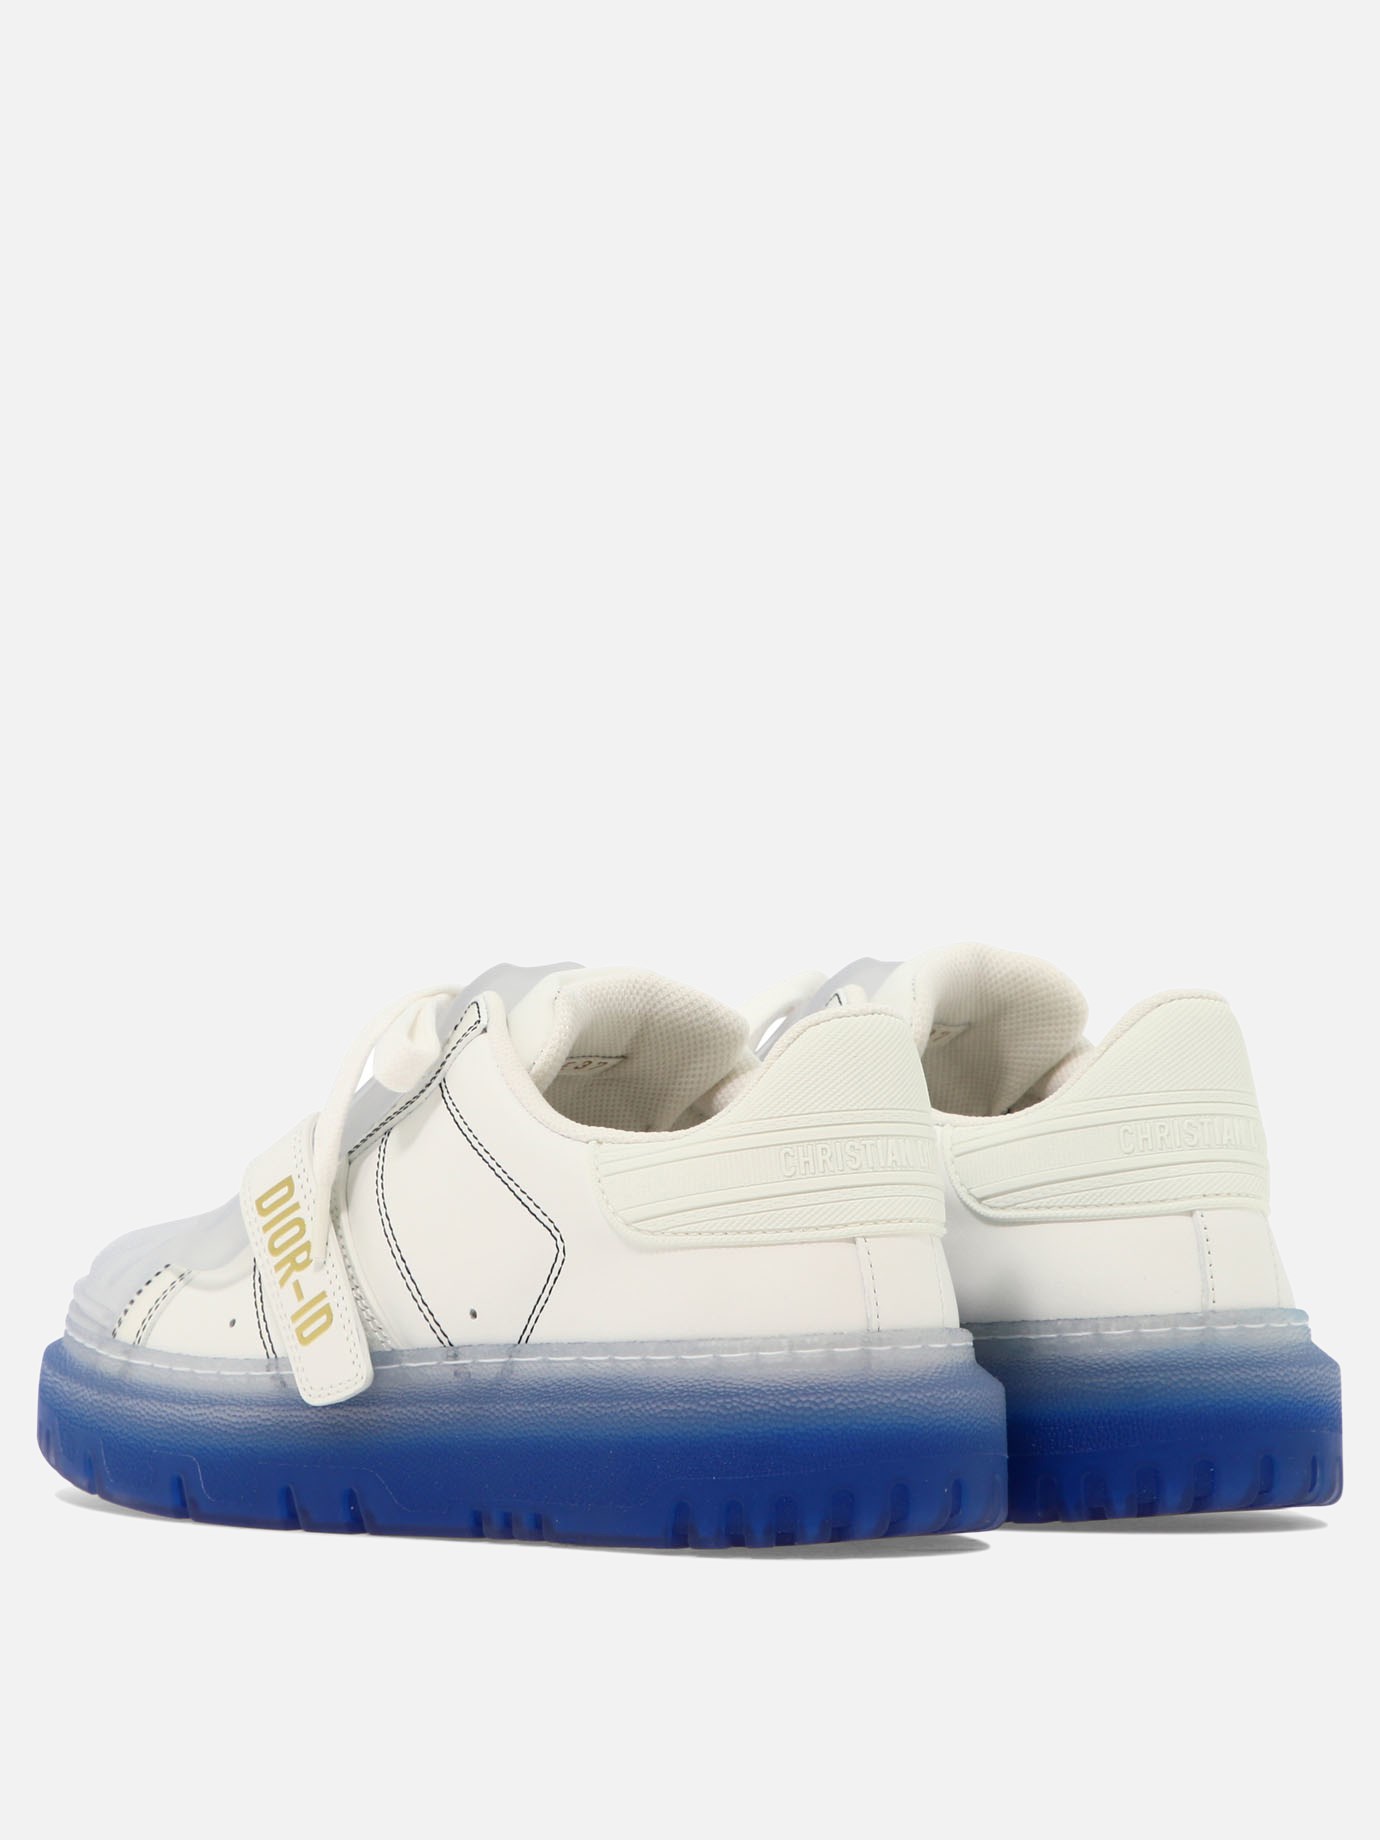  Dior-Id  sneakers by Dior